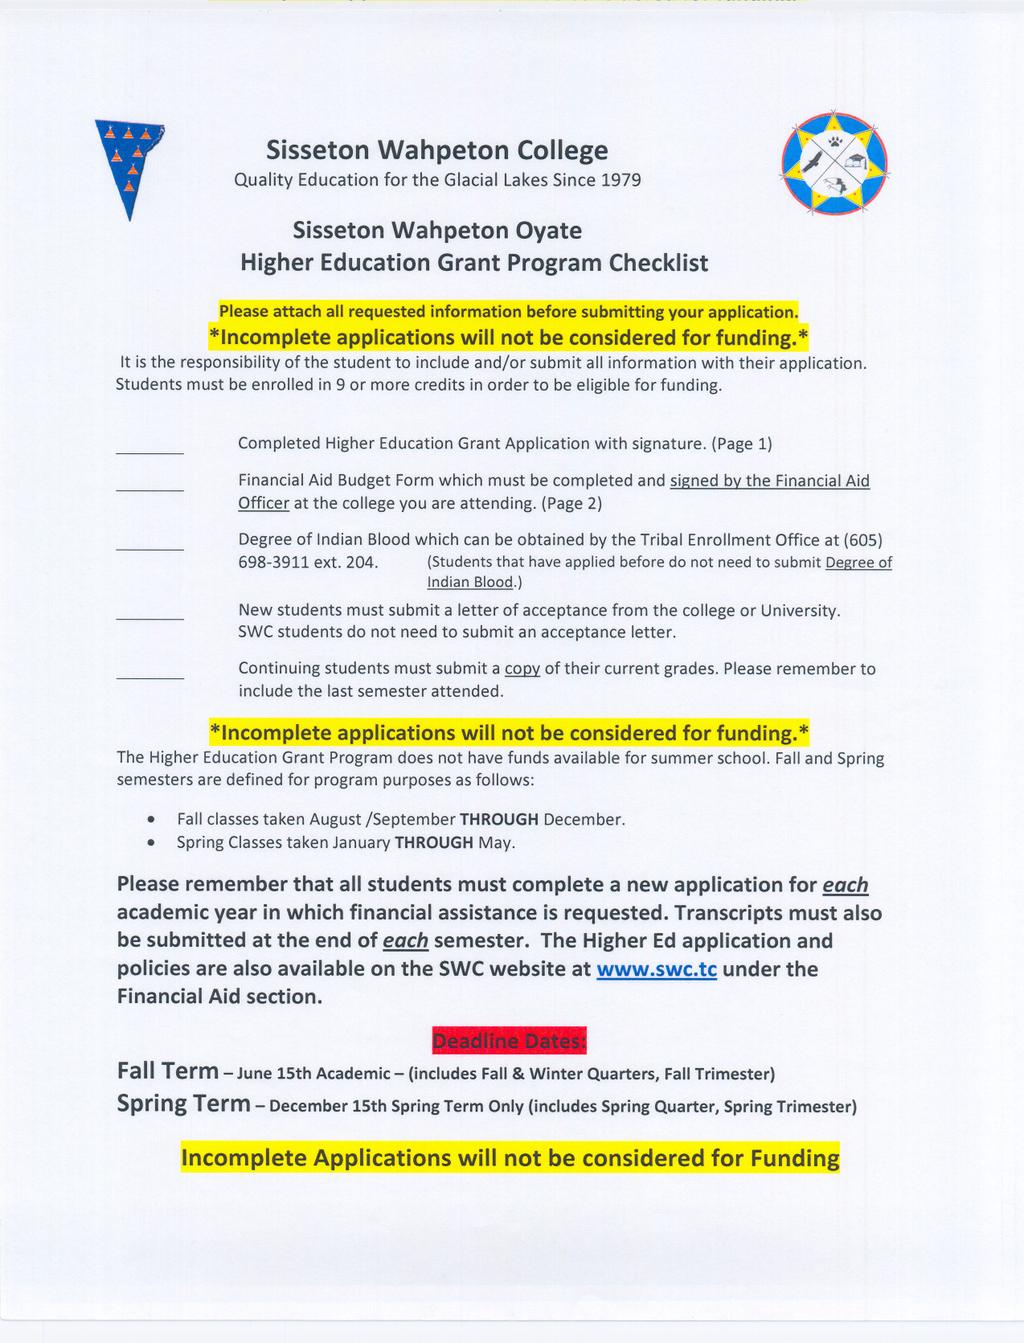 , Sisseton Wahpeton College Quality Education for the Glacial LakesSince 1979 Sisseton Wahpeton Ovate Higher Education Grant Program Checklist Please attach all requested information before